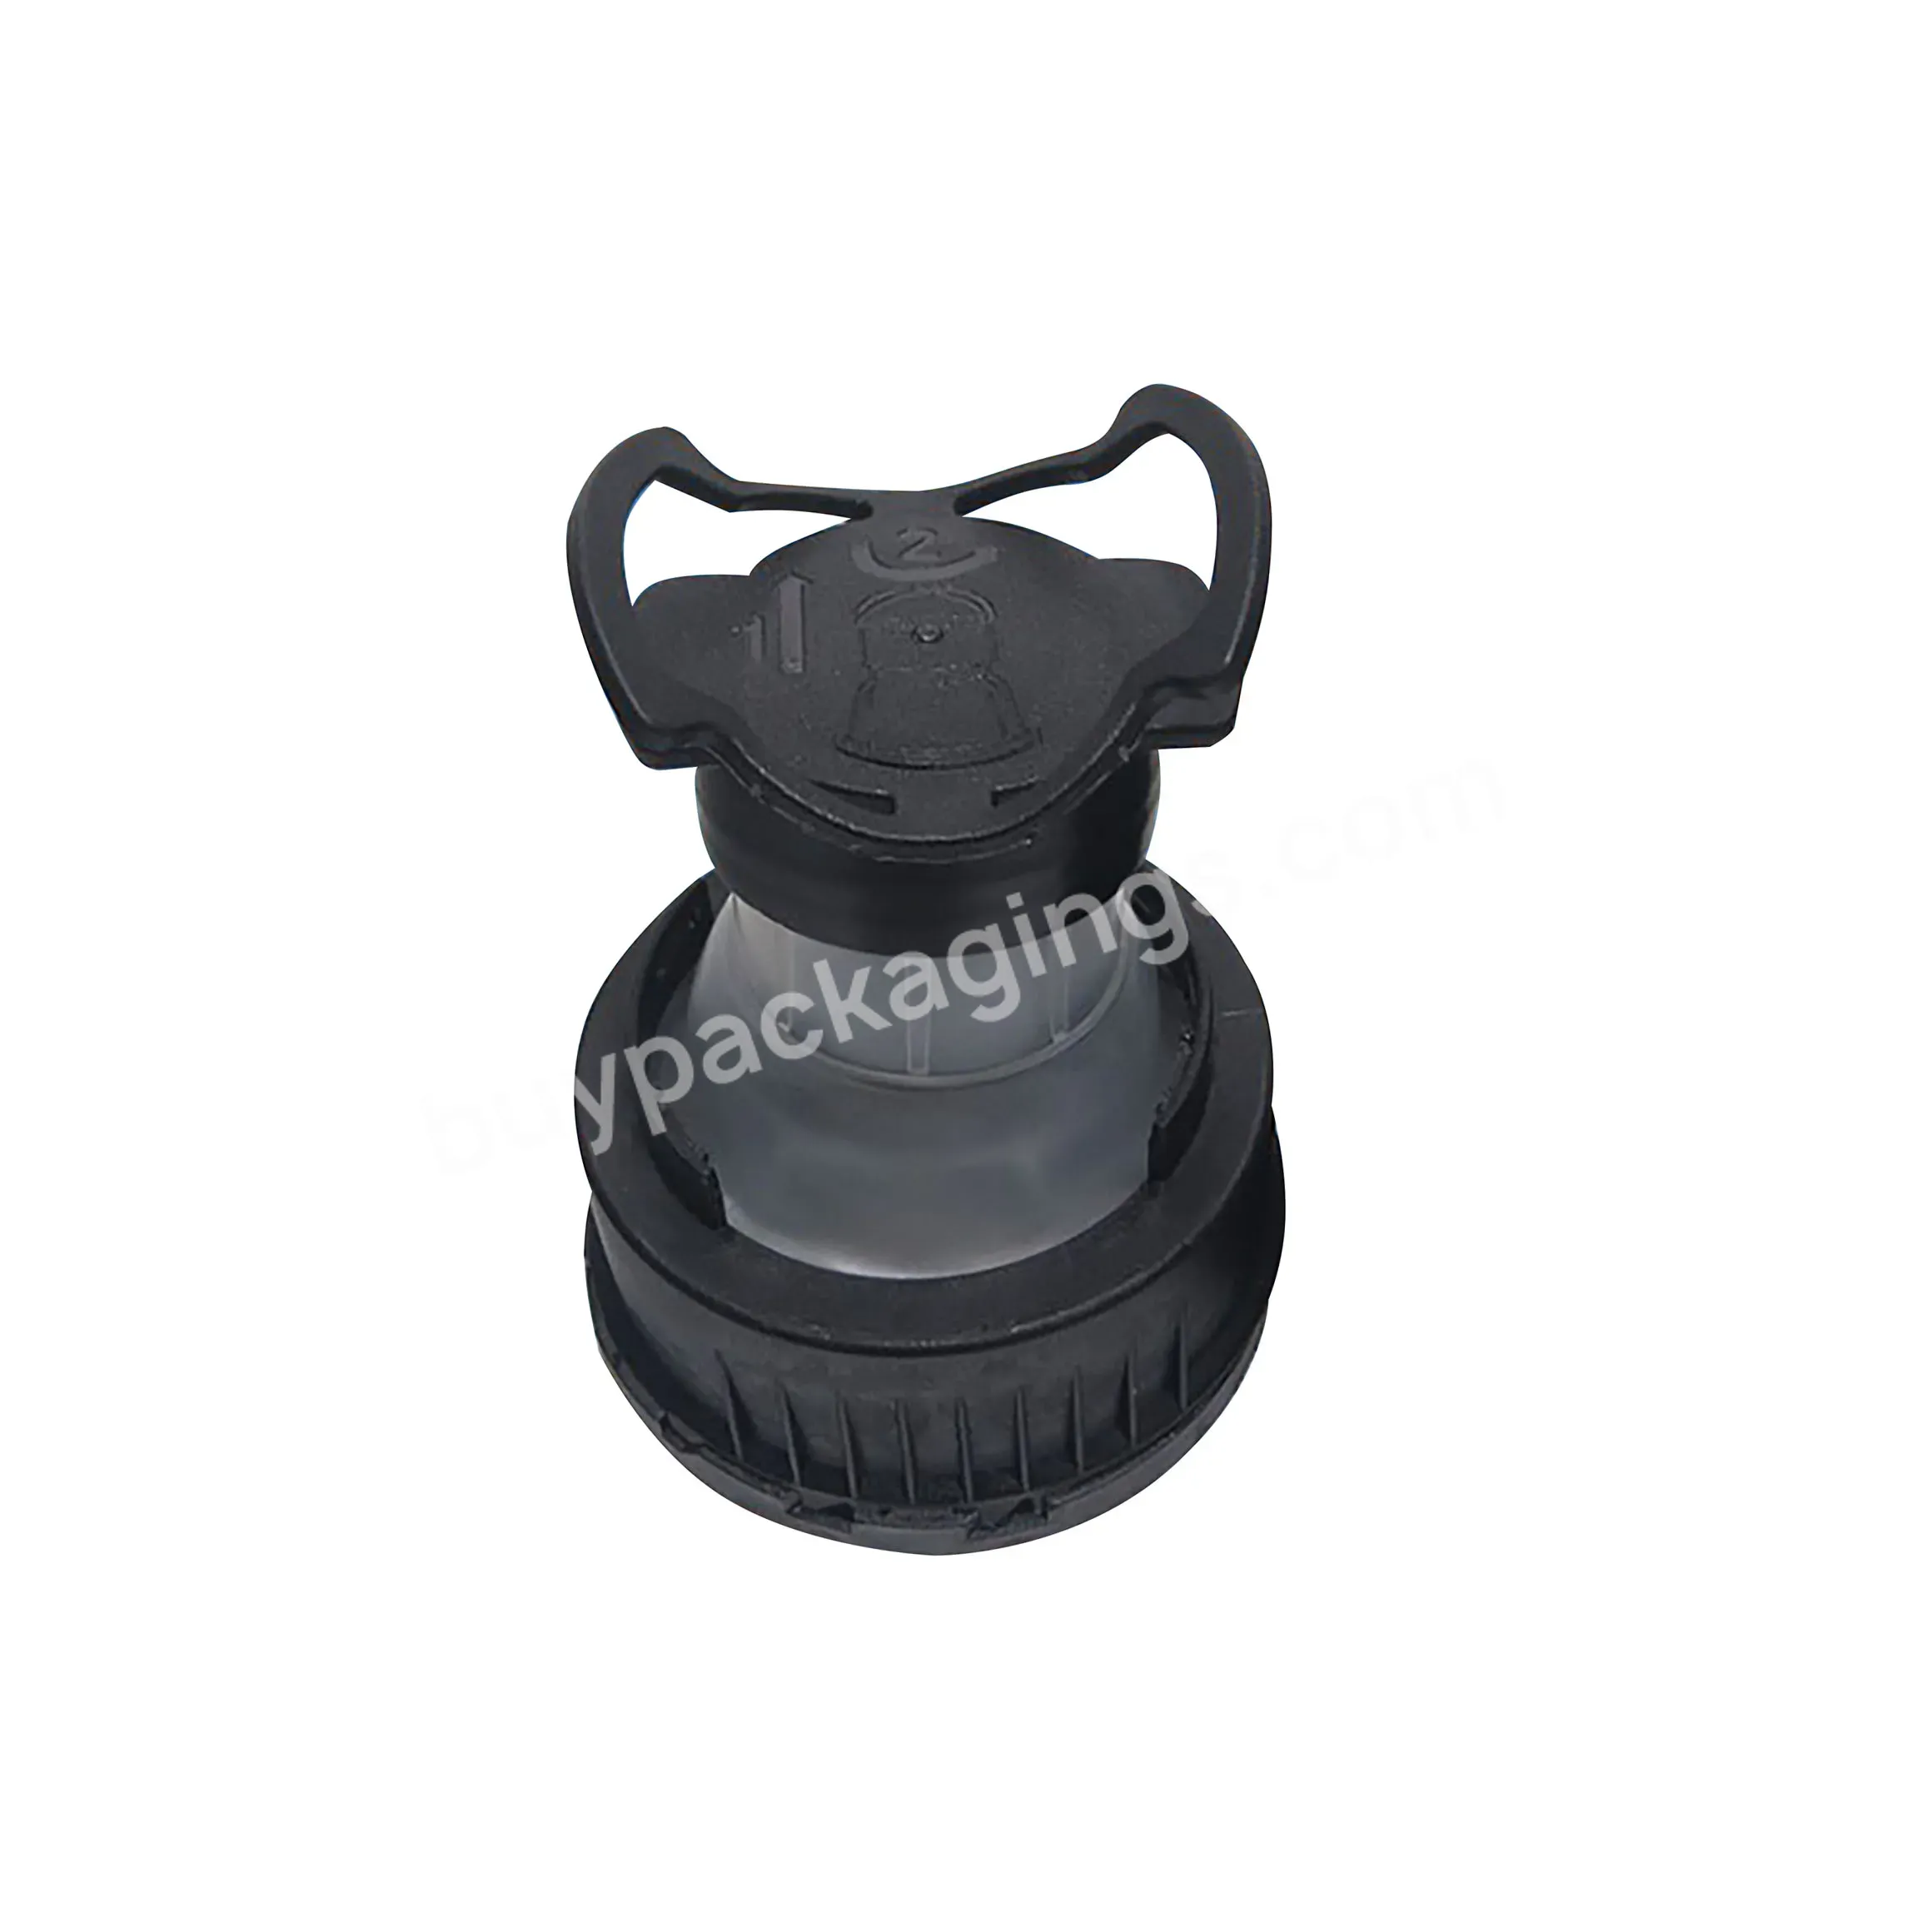 Wholesale Customized Pp Plastic Double Ring Pulling Chemical Telescopic Oil Black Cap For Plastic Barrel Lubricating Oil Bottle - Buy Wholesale Customized Pp Plastic Double Ring Pulling Cap,Chemical Telescopic Oil Black Cap,Cap For Plastic Barrel Lub